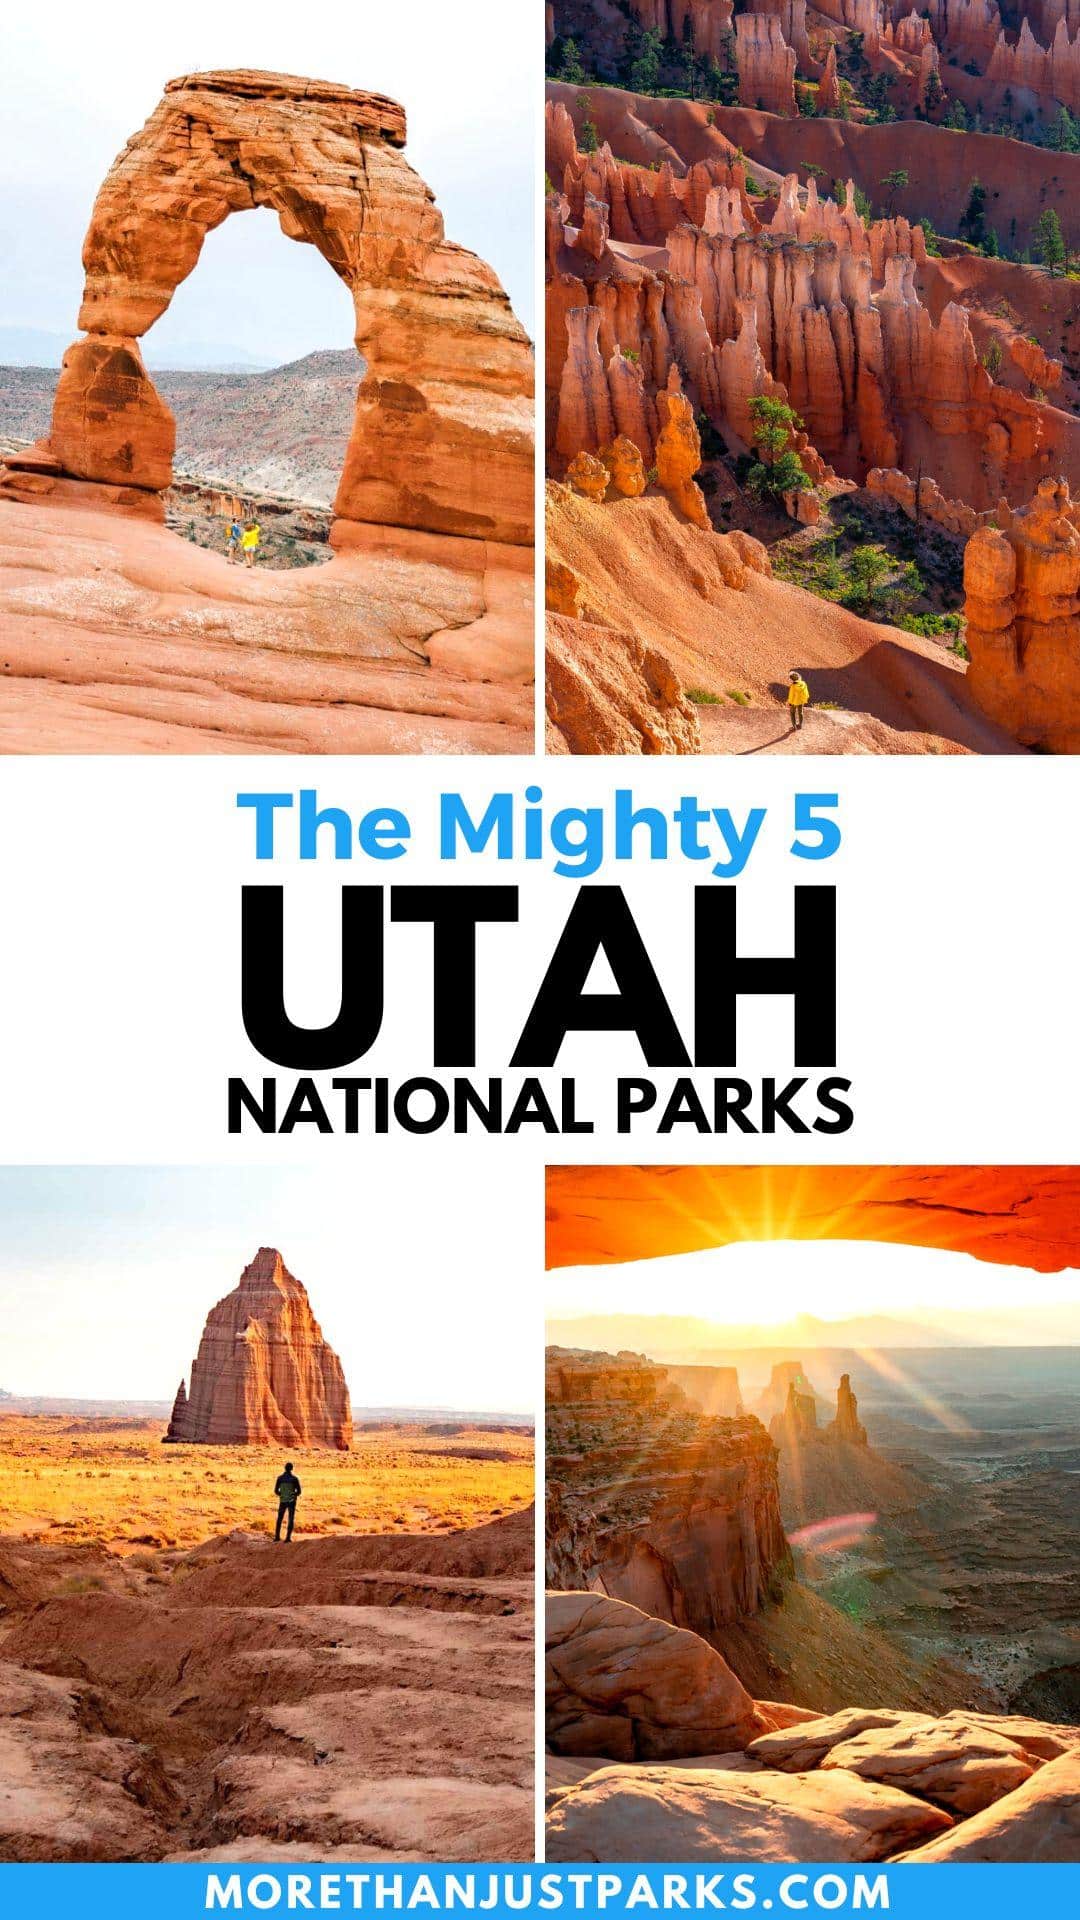 utah national parks, mighty five national parks, mighty 5 utah